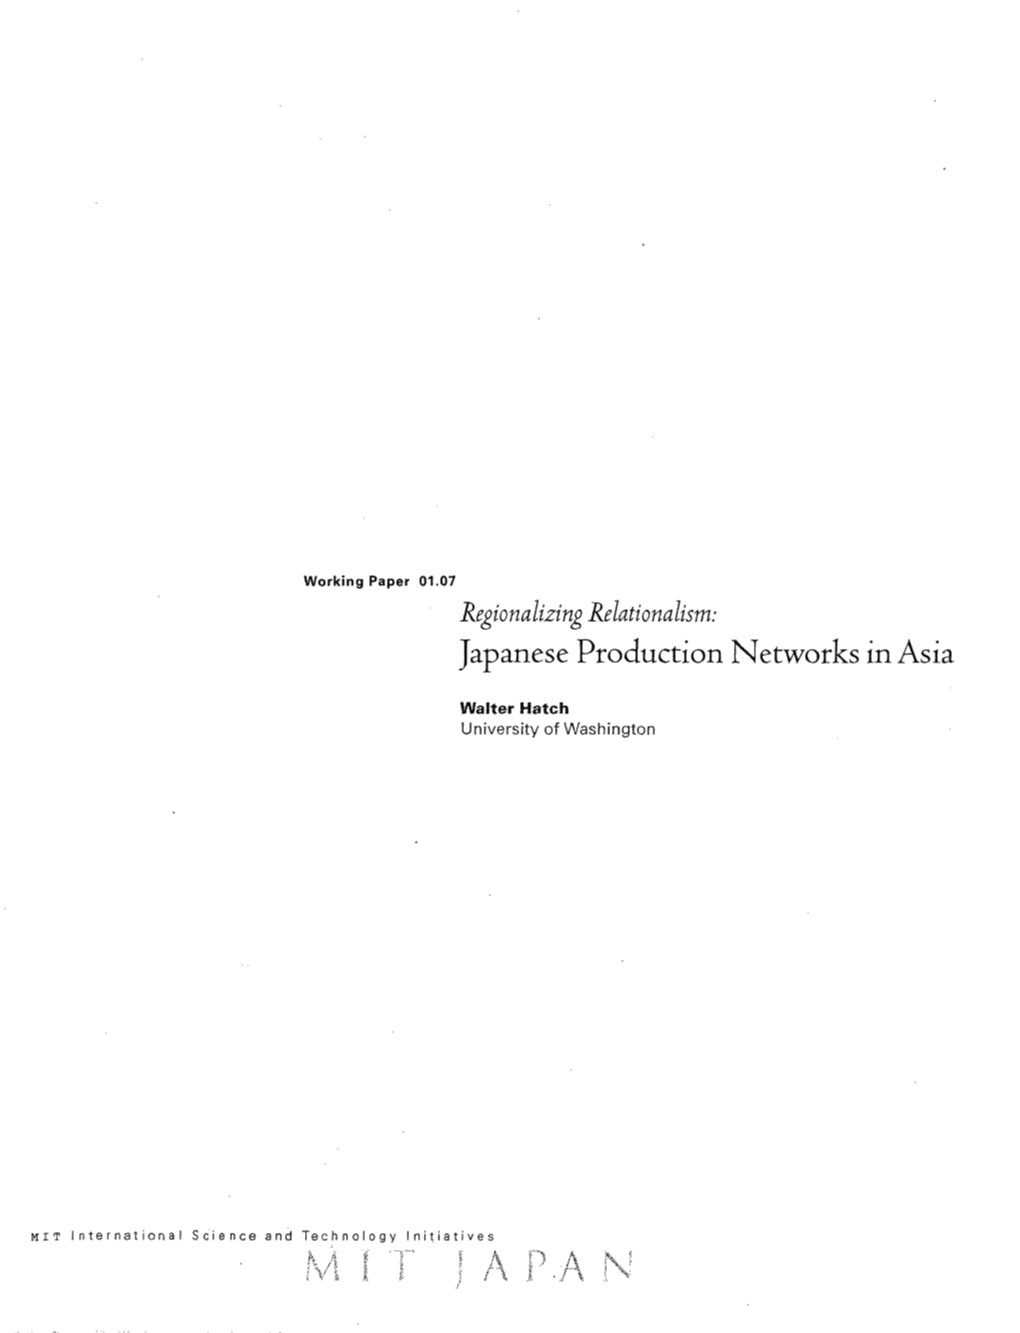 Japanese Production Networks in Asia